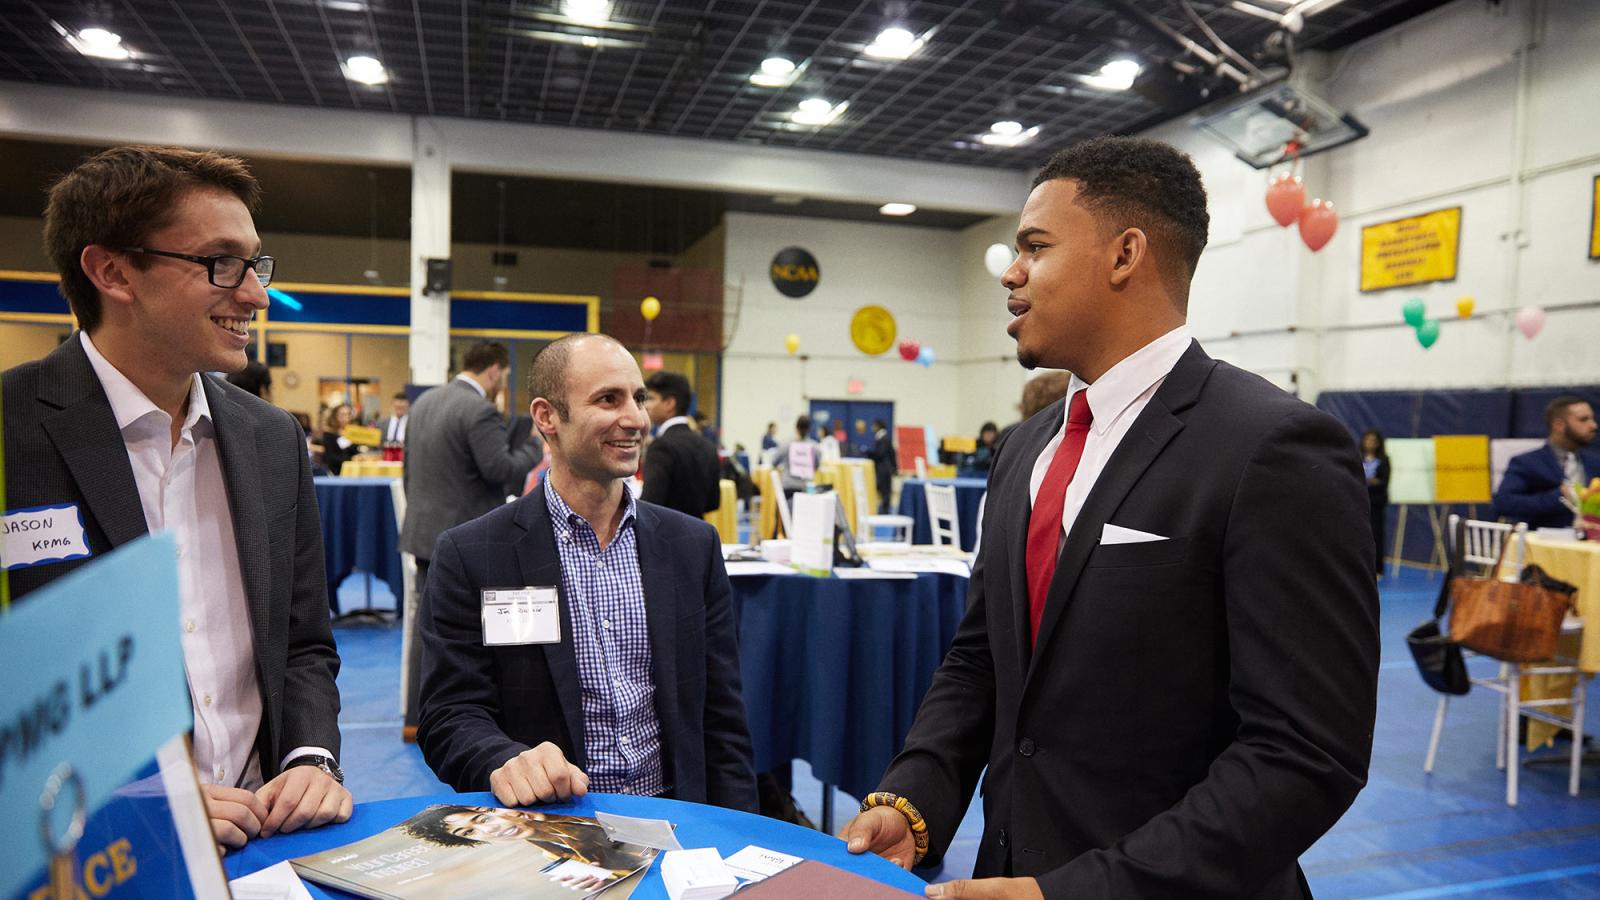 Pace University student talking to prospective employers at a career fair.